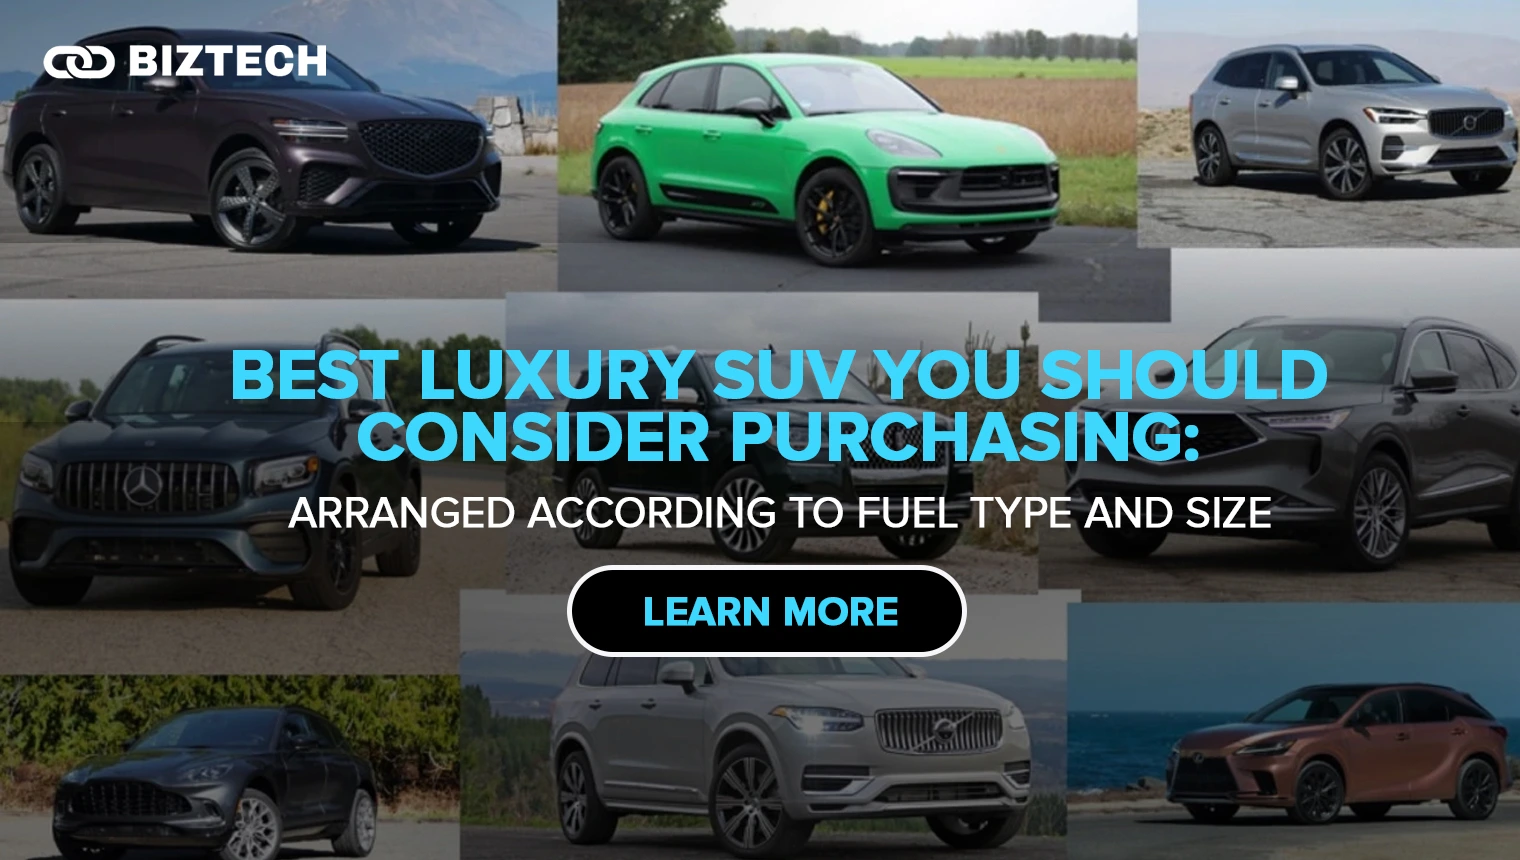 Best Luxury SUV You Should Consider Purchasing: Arranged According to Fuel Type and Size